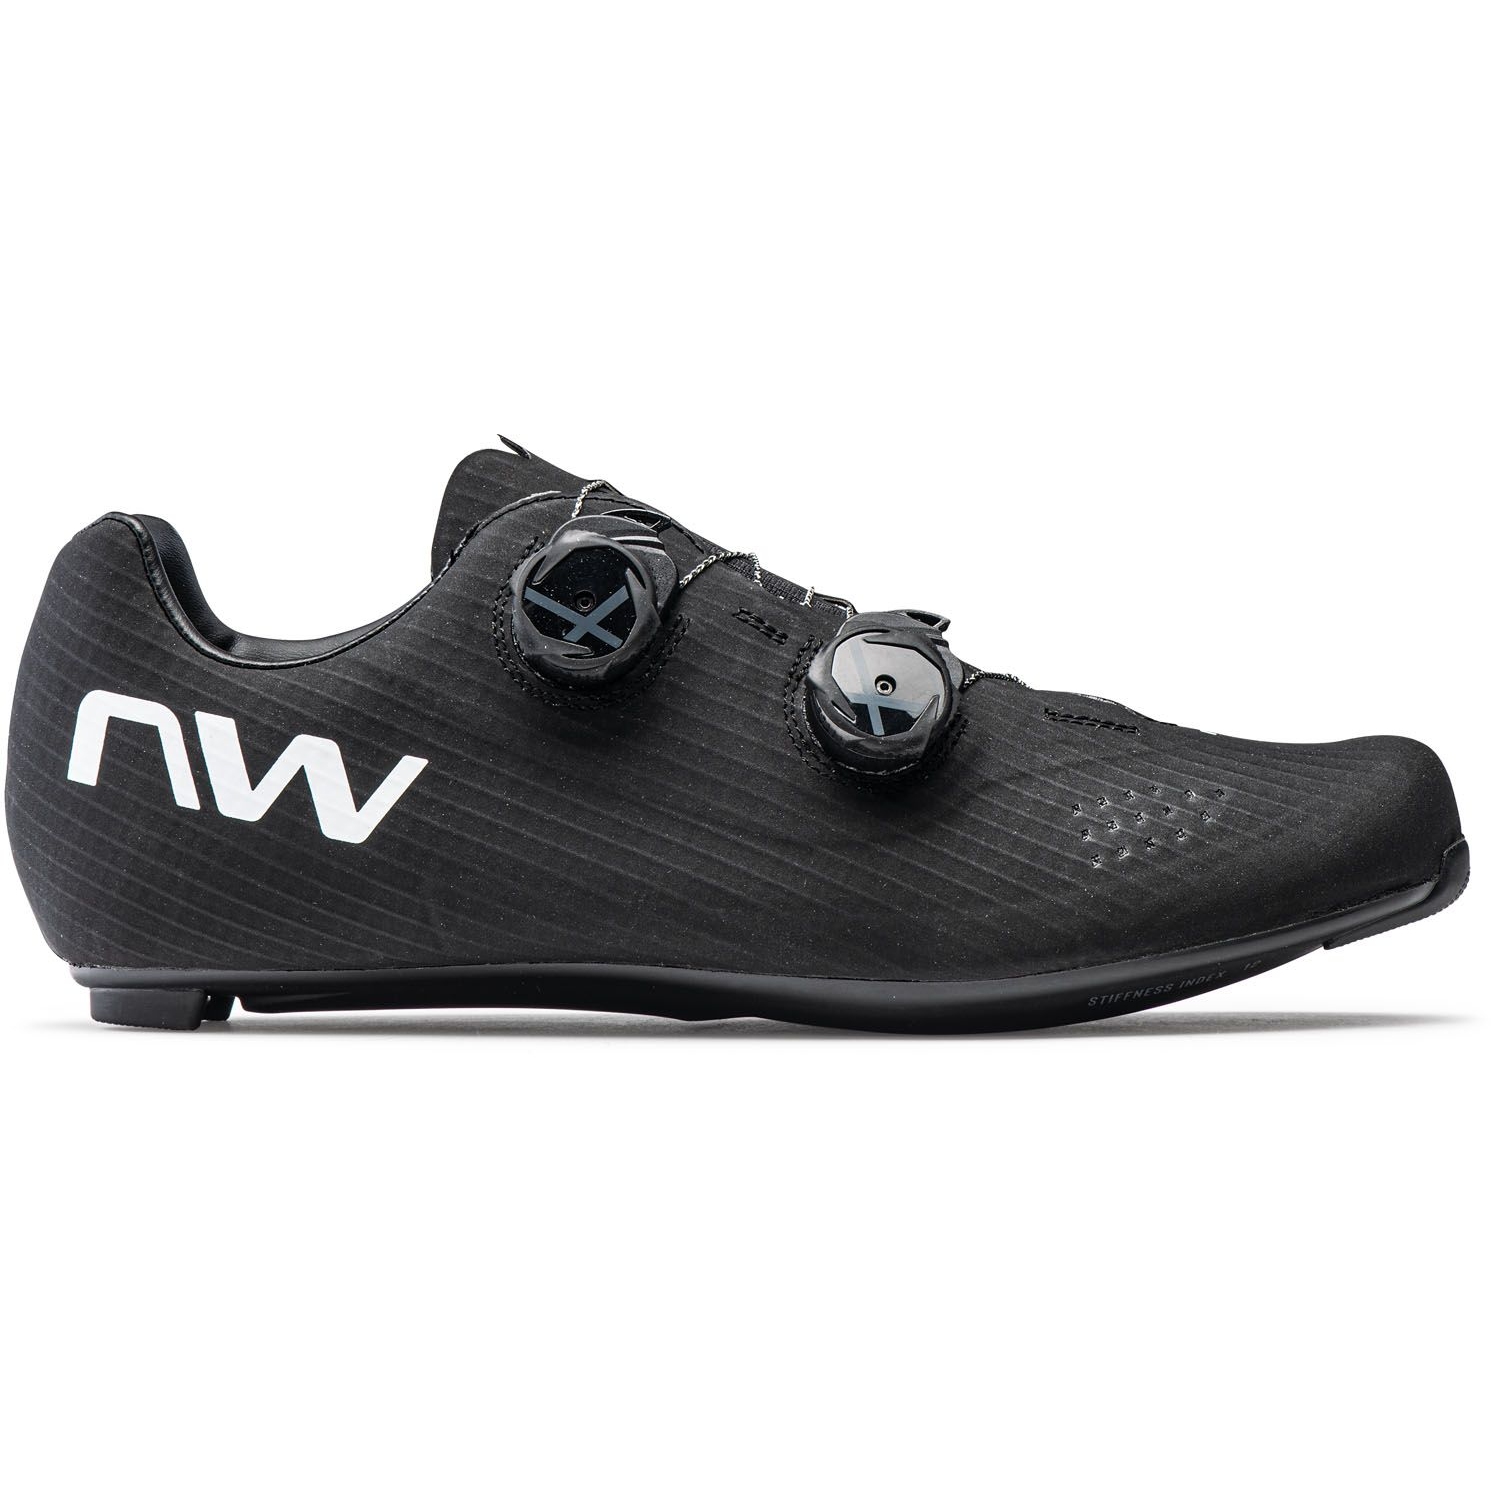 Picture of Northwave Extreme Gt 4 Road Shoes Men - black/white 11